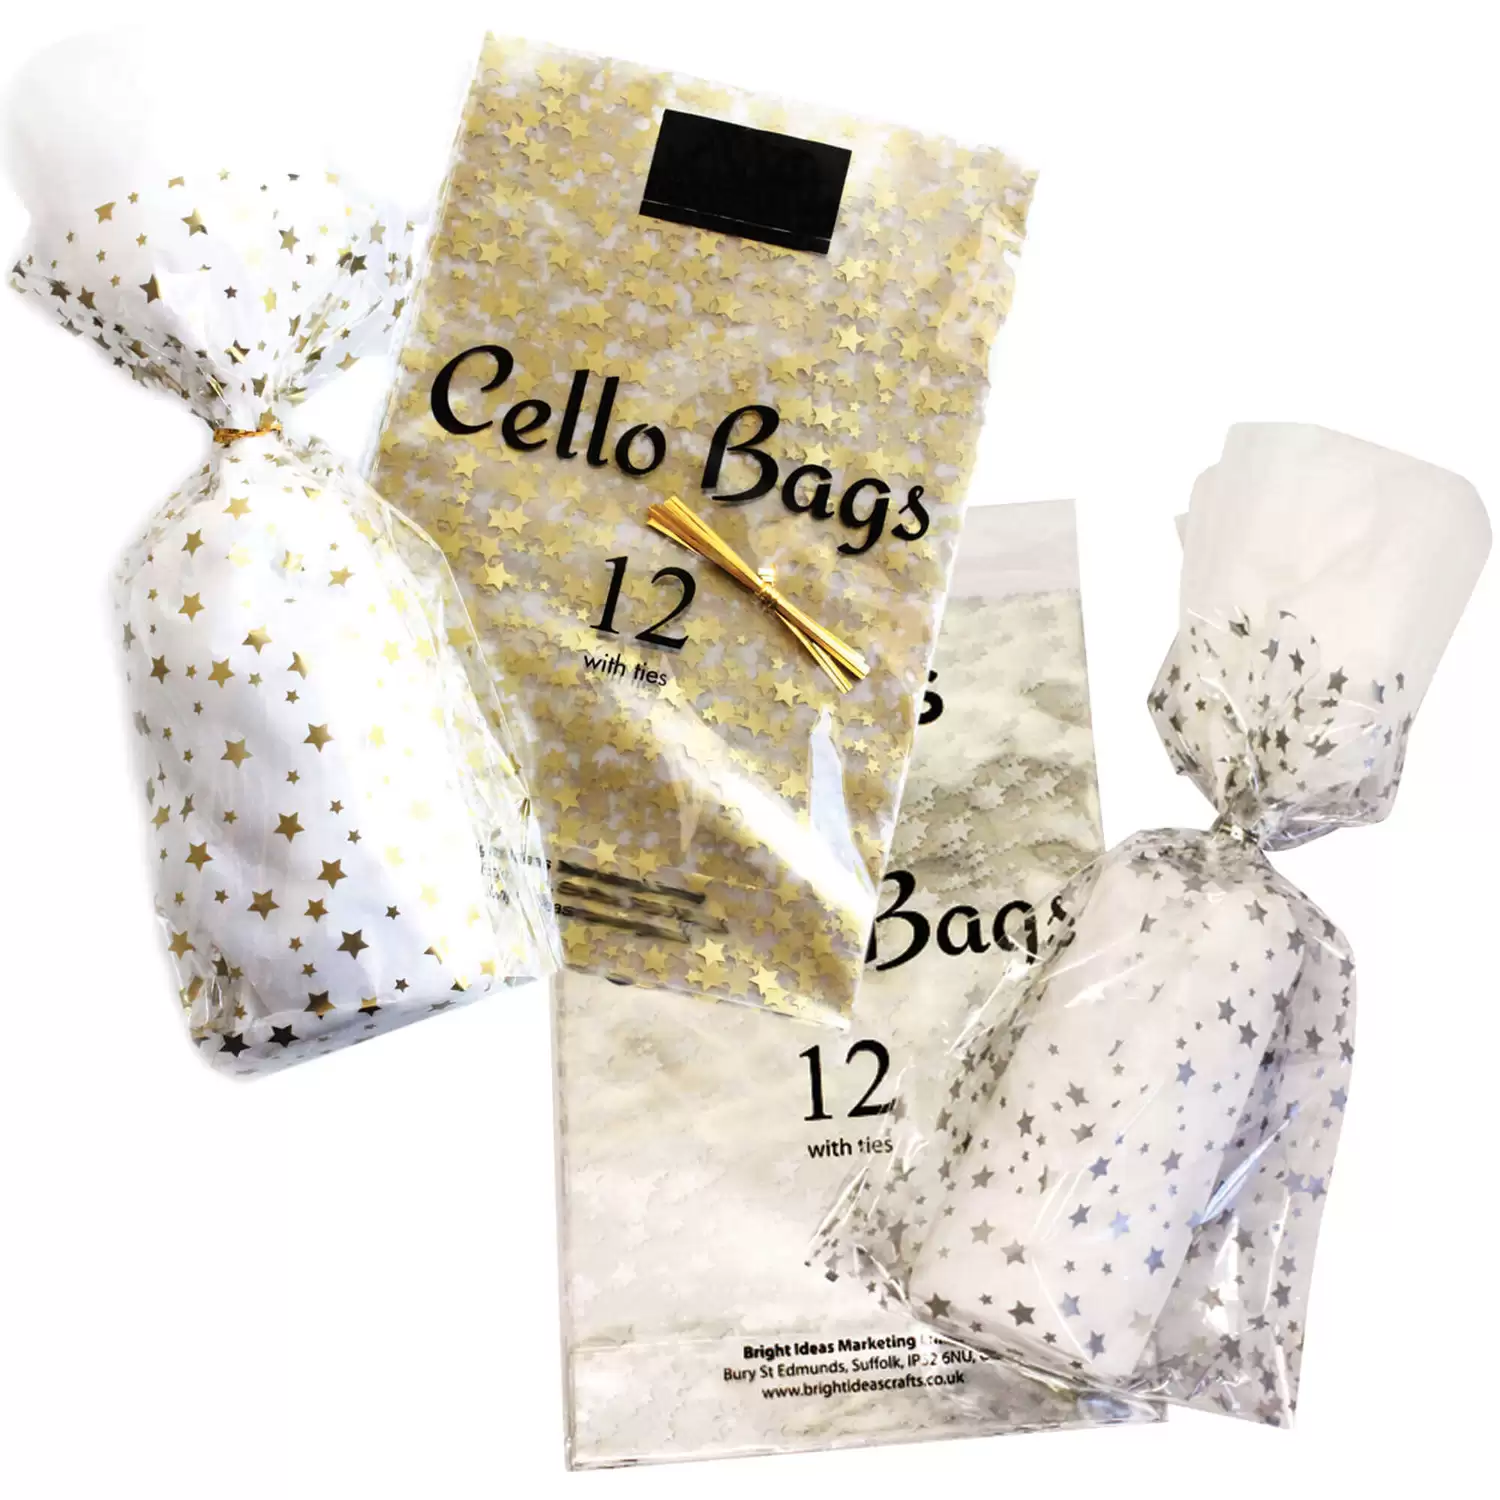 Cellophane Bags Manufacturers and Suppliers in the USA